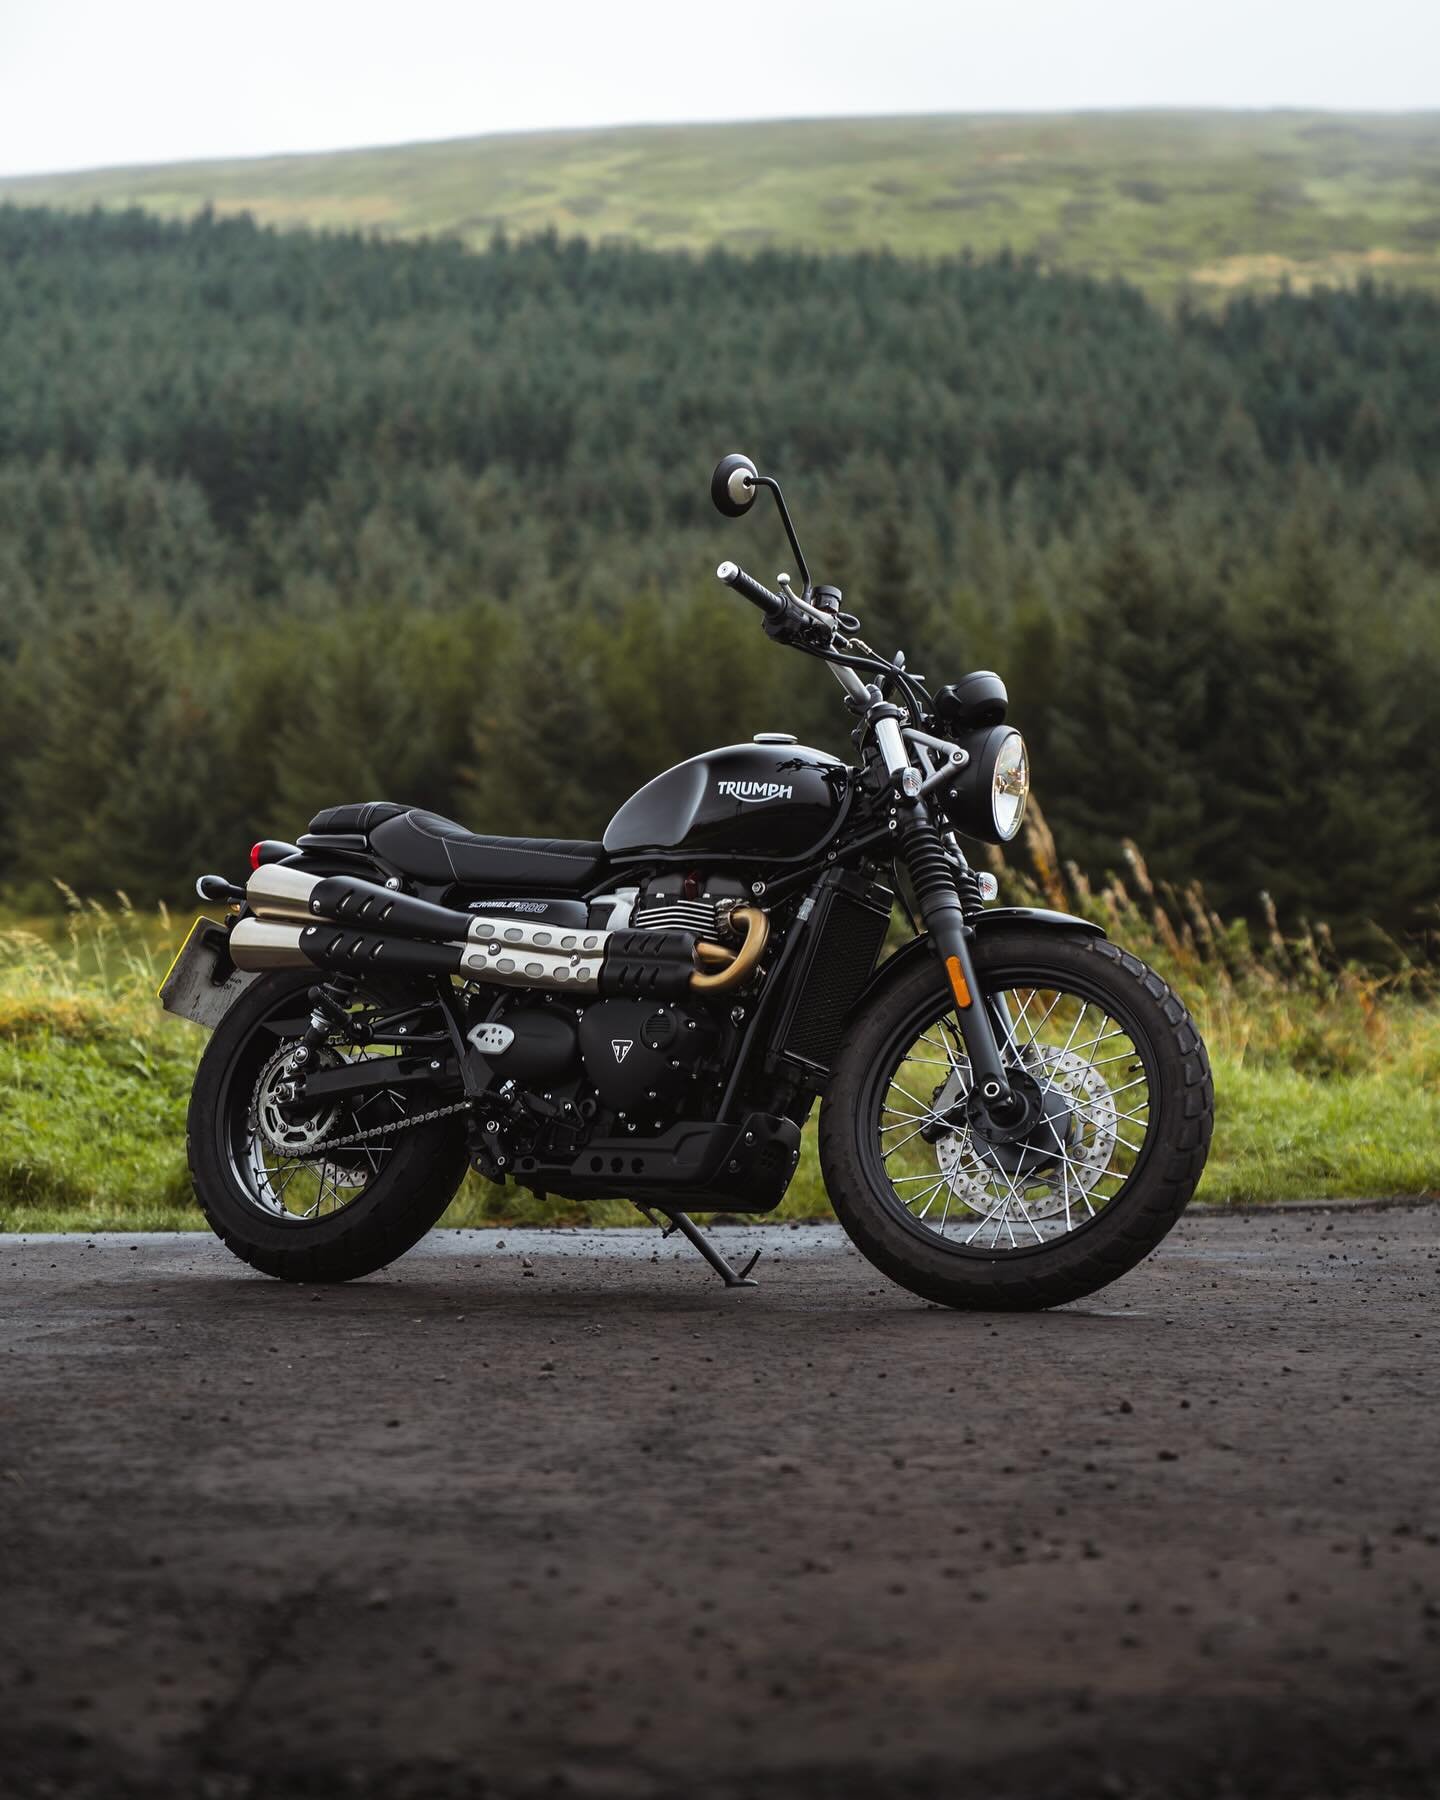 Where are all my biking followers at? 

Biking weather is (very) slowly coming back around again. Gotta take those dry days and evenings when I can get them! 

Looking forward to another delivery from @triumphuk at the end of the month. 

#triumph #t